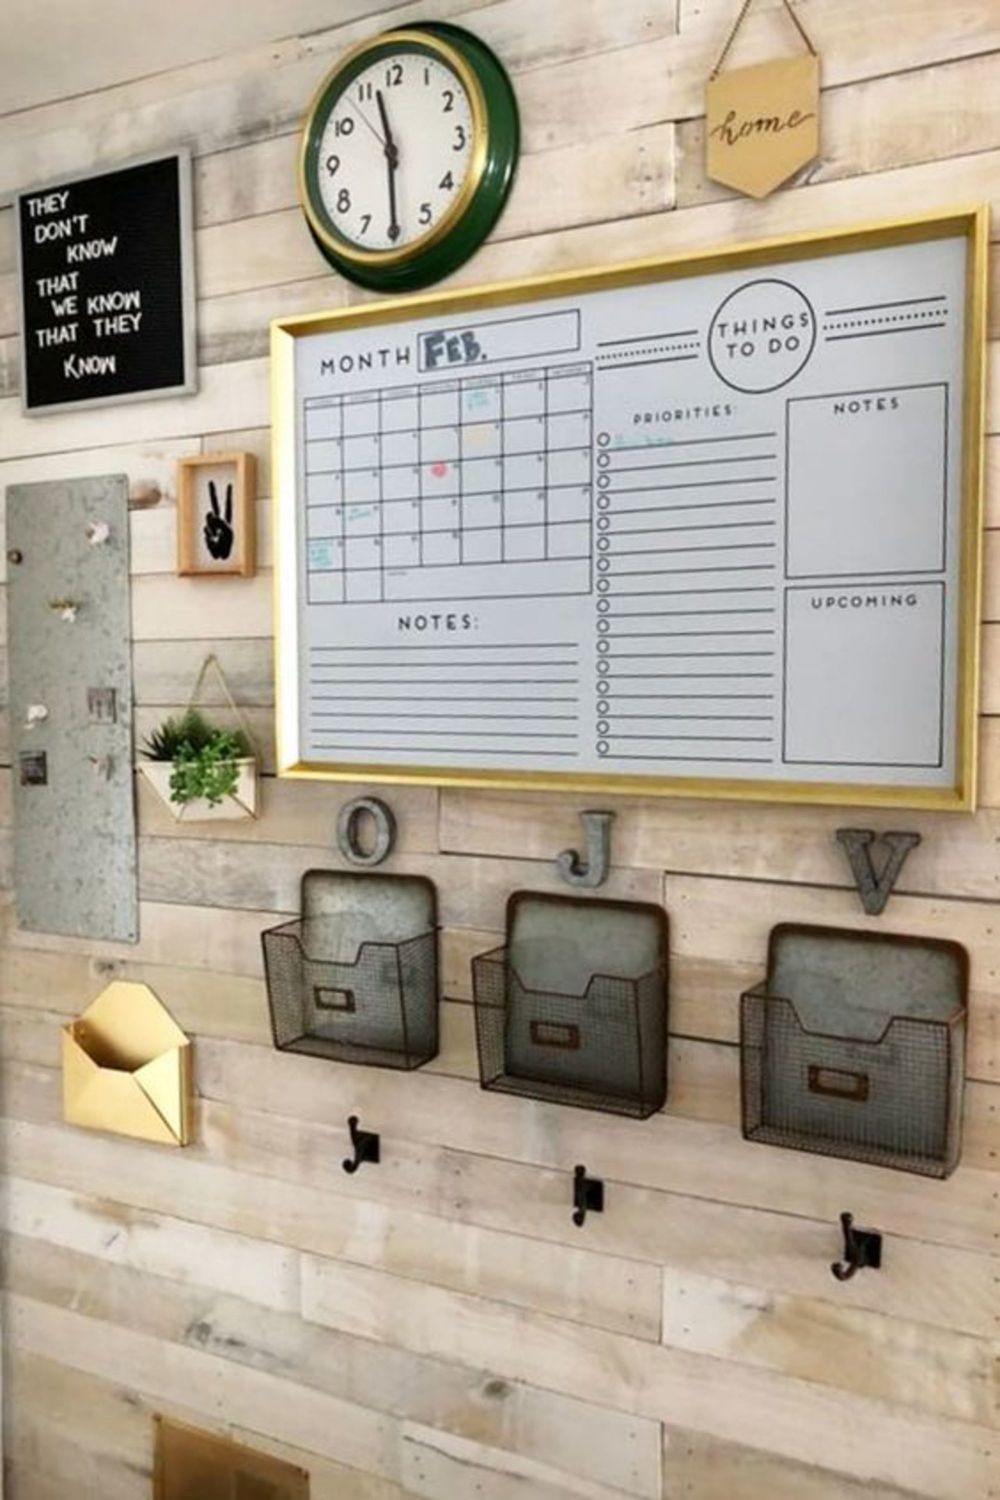 Family Command Center Wall and Kitchen Schedule Board Ideas - Family Command Center Wall and Kitchen Schedule Board Ideas -   17 diy Organization board ideas